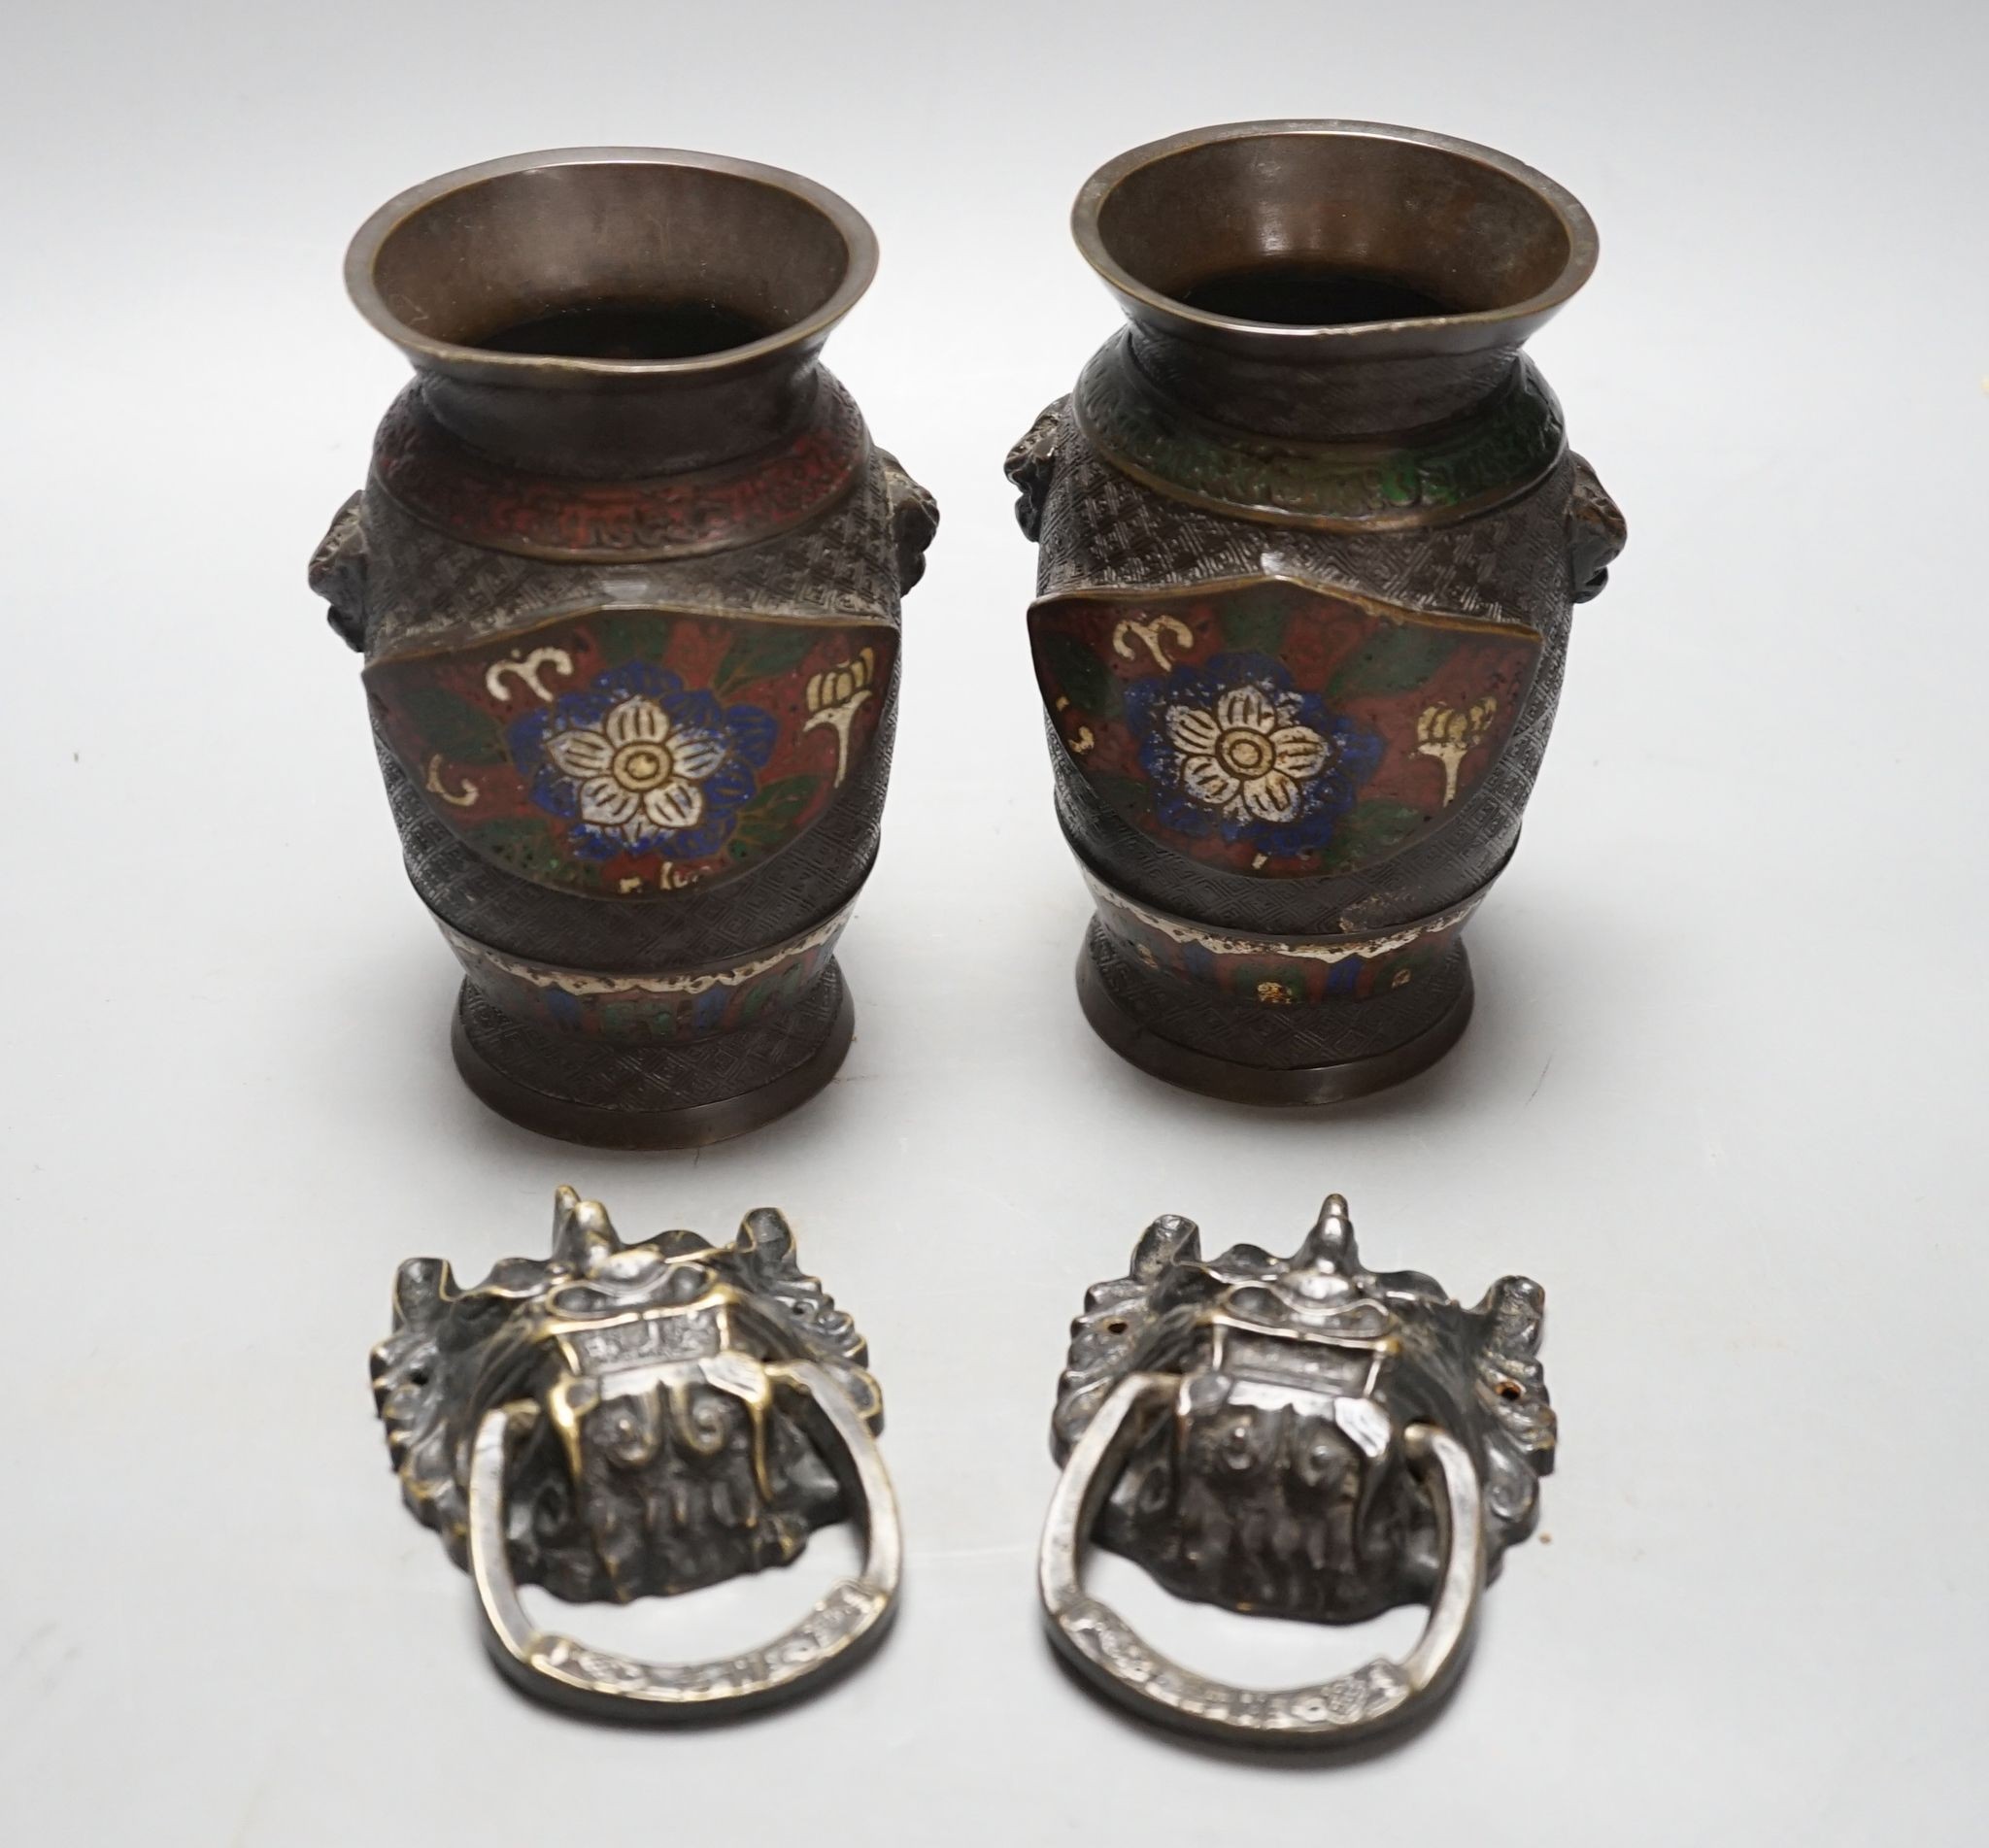 A pair of Chinese cast brass mask ring handles and a pair of Japanese enamelled bronze vases, 15 cm